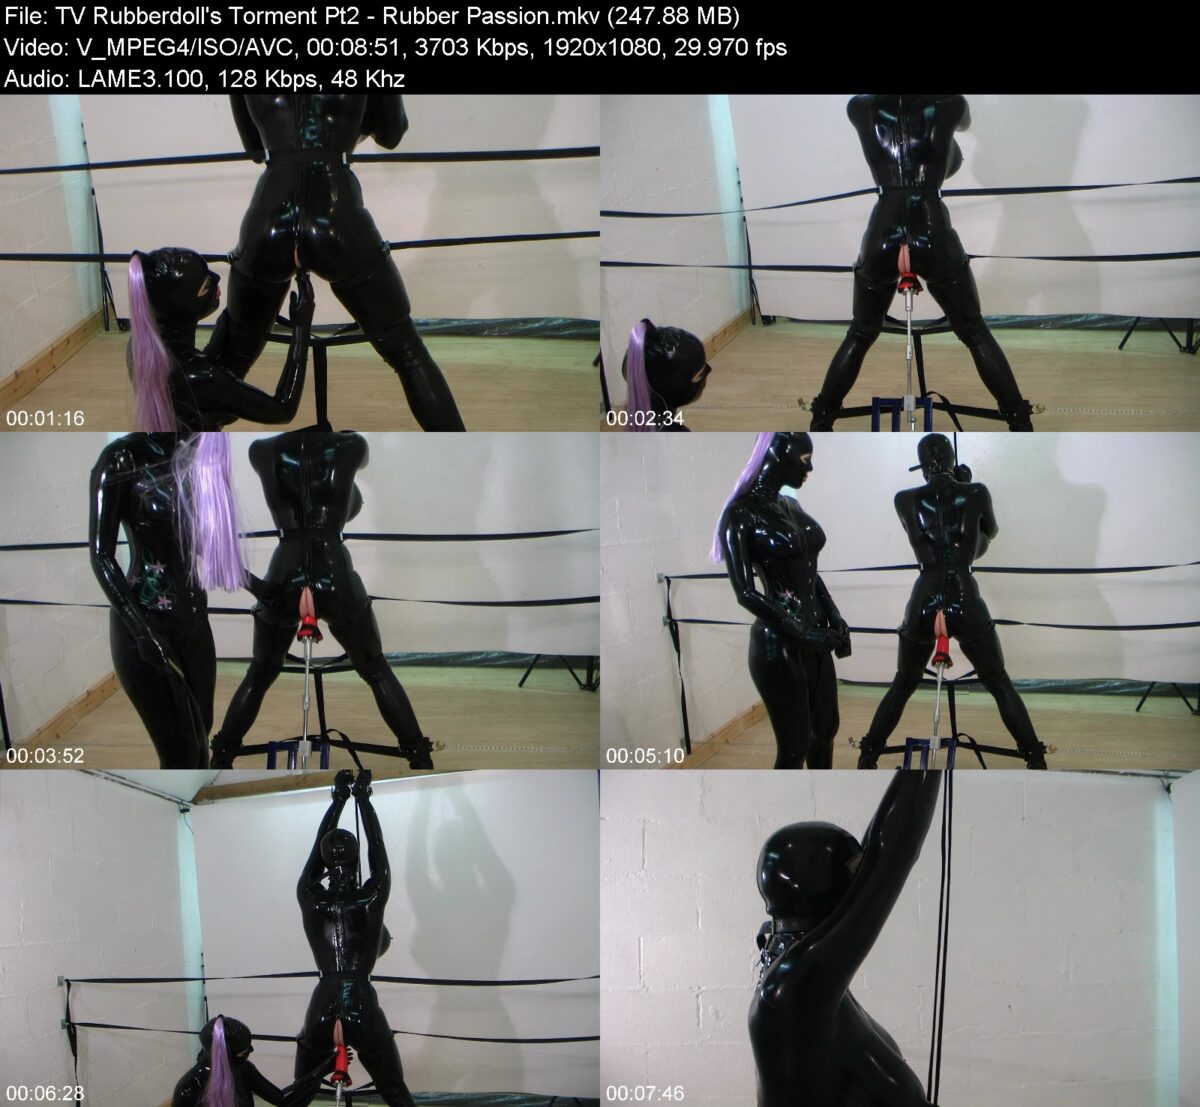 Actress: TV Rubberdoll’s Torment Pt2. Title and Studio: Rubber Passion